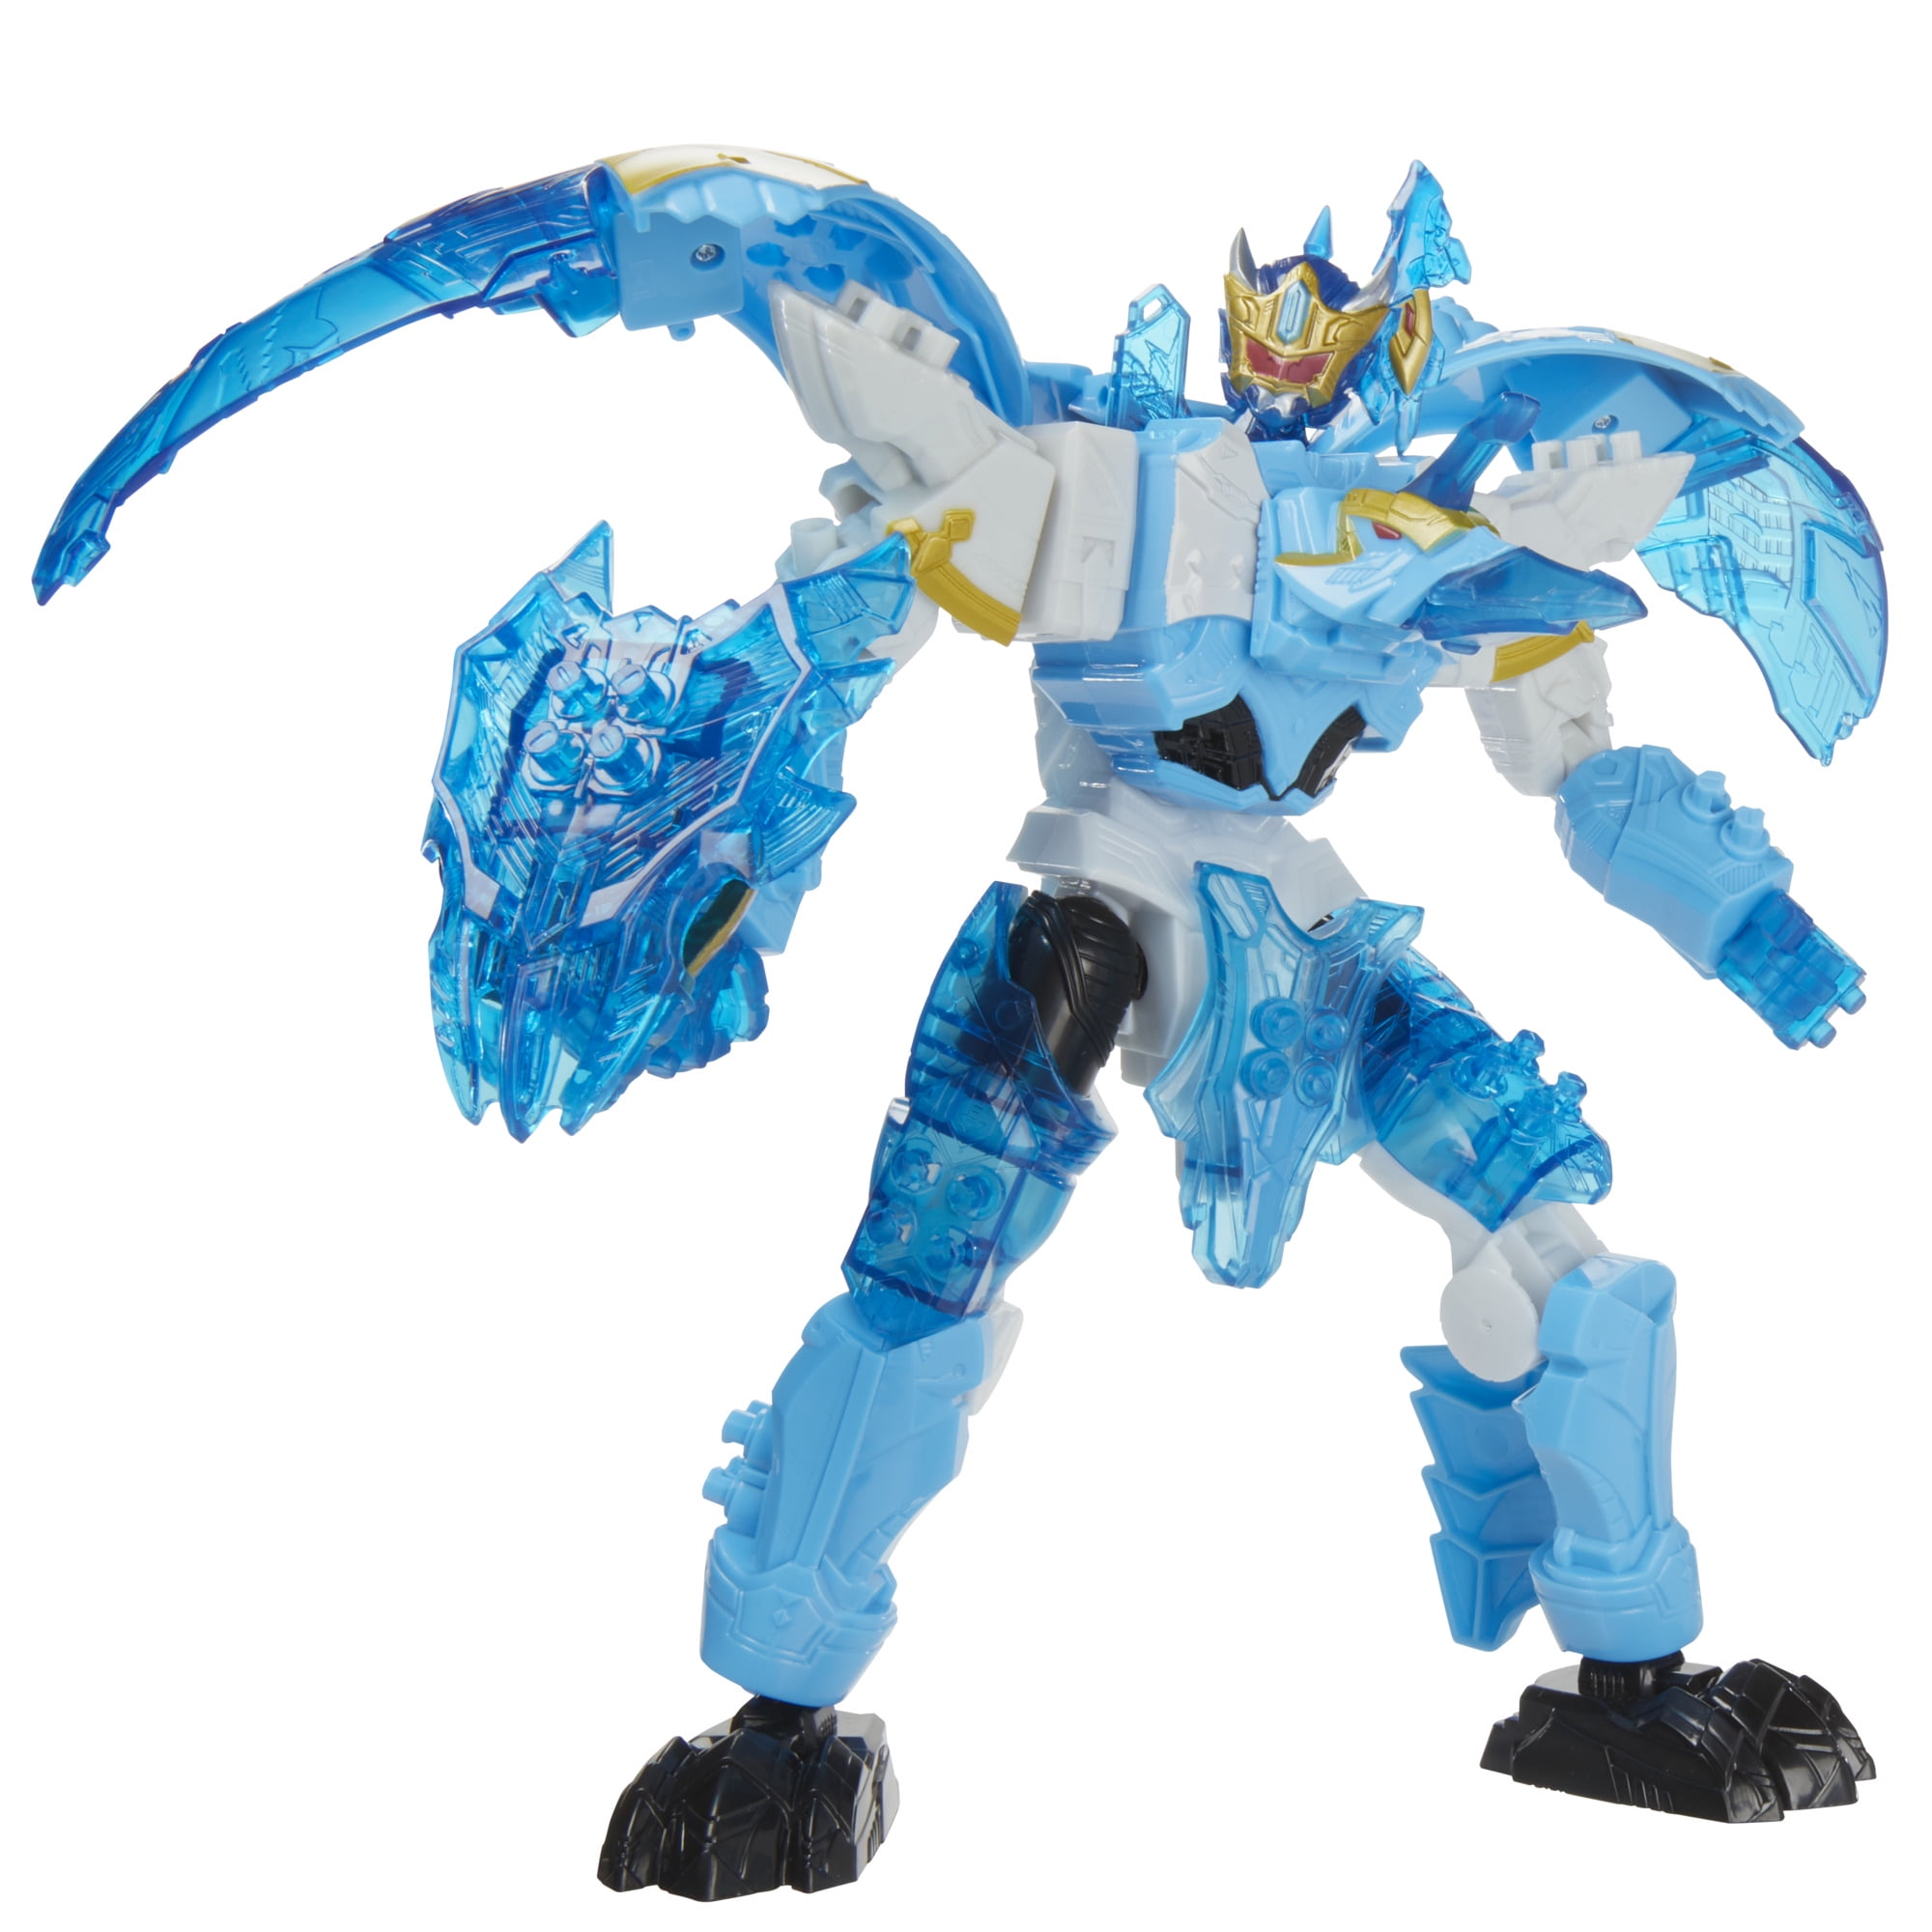 Power Rangers Dino Ptera Freeze Zord, Morphing Dino Robot Zord with Zord Link